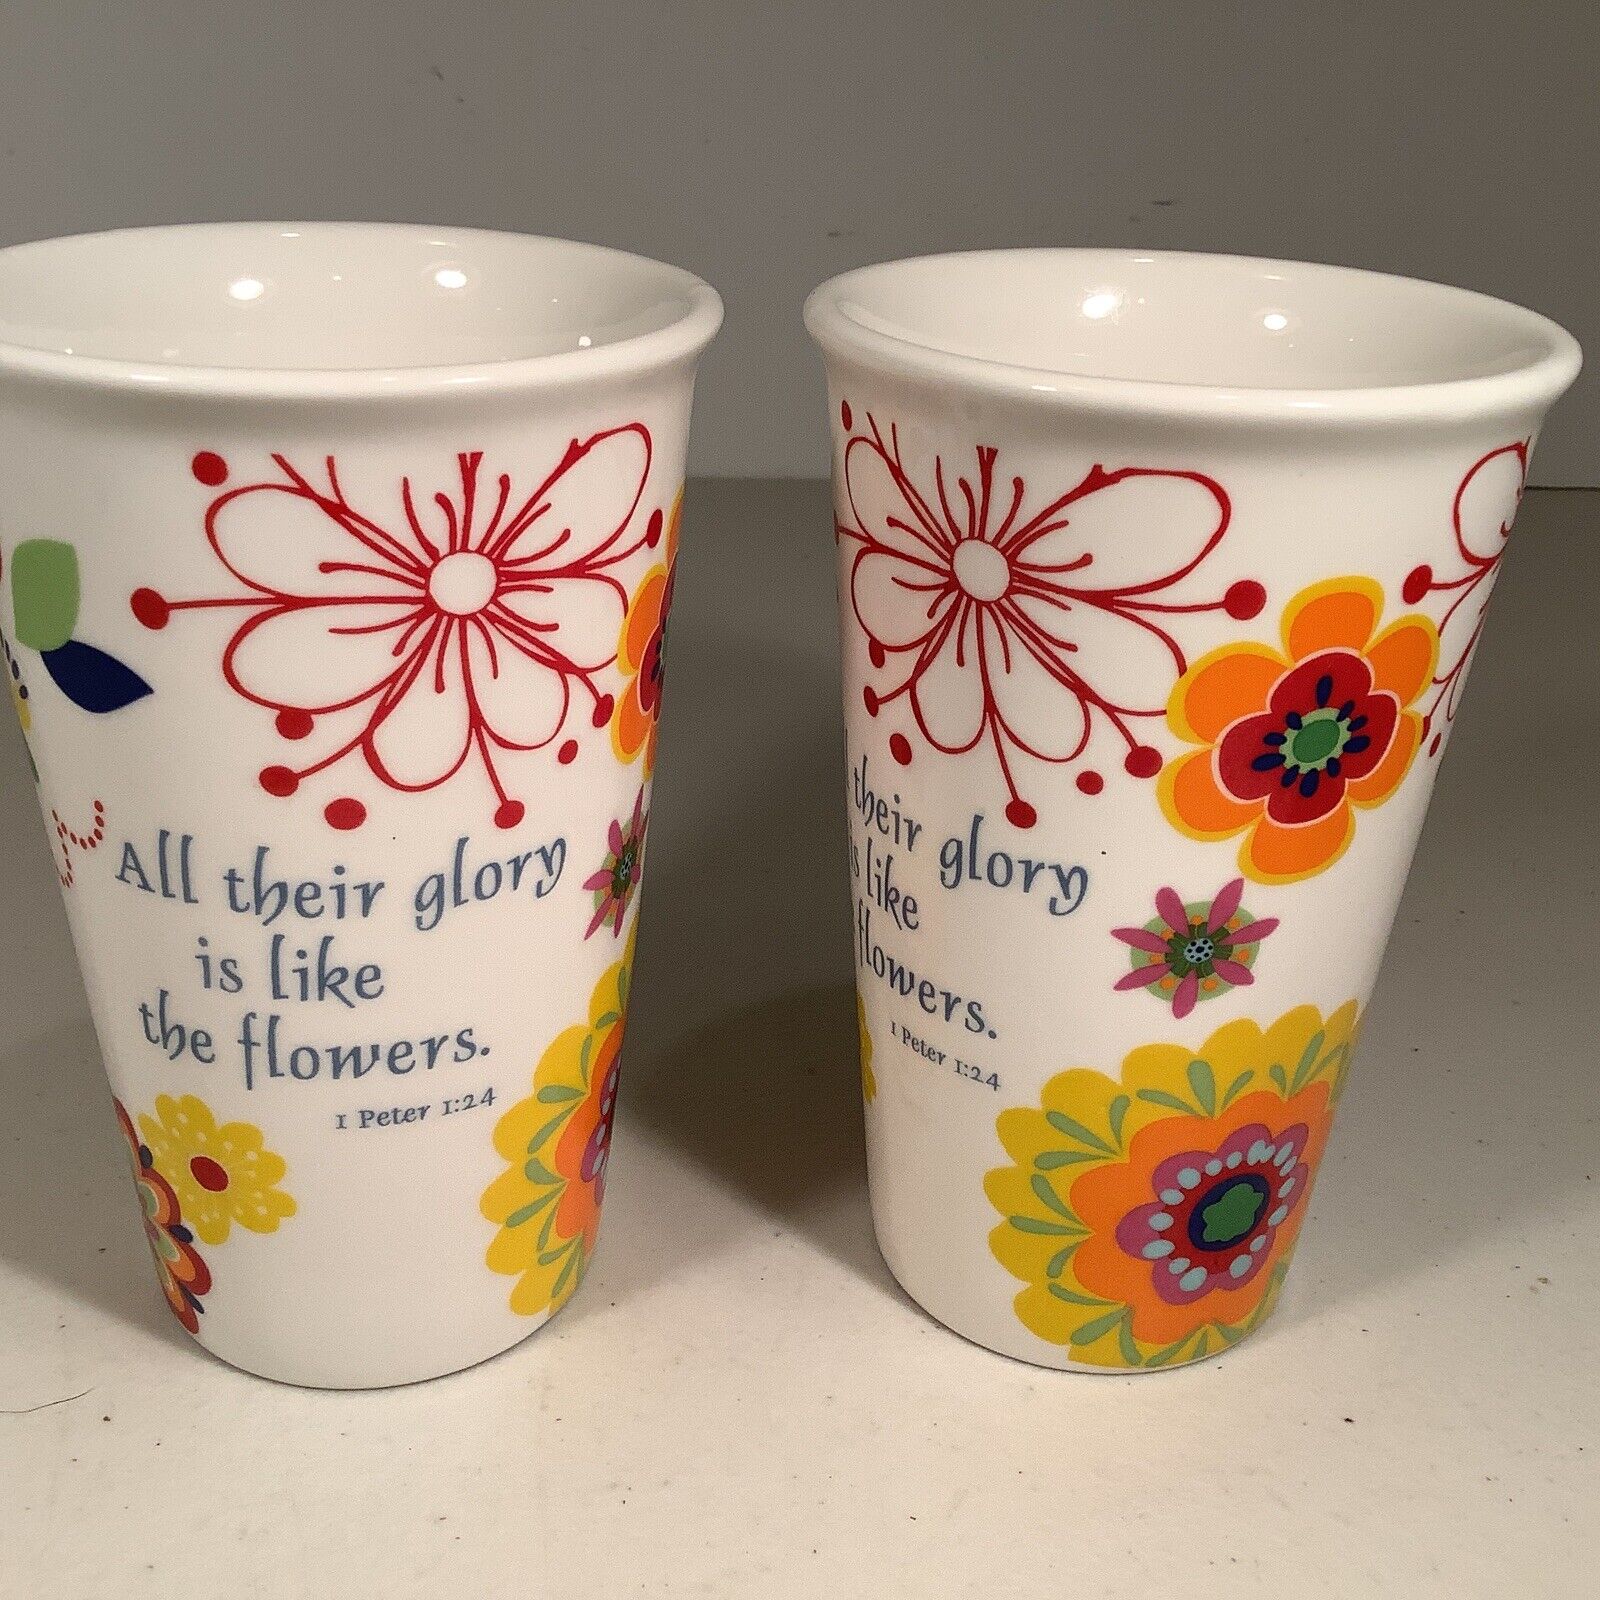 Pacific Ceramic Mugs, All Their Glory is Like the Flowers, 1 Peter 1:24 Set of 2